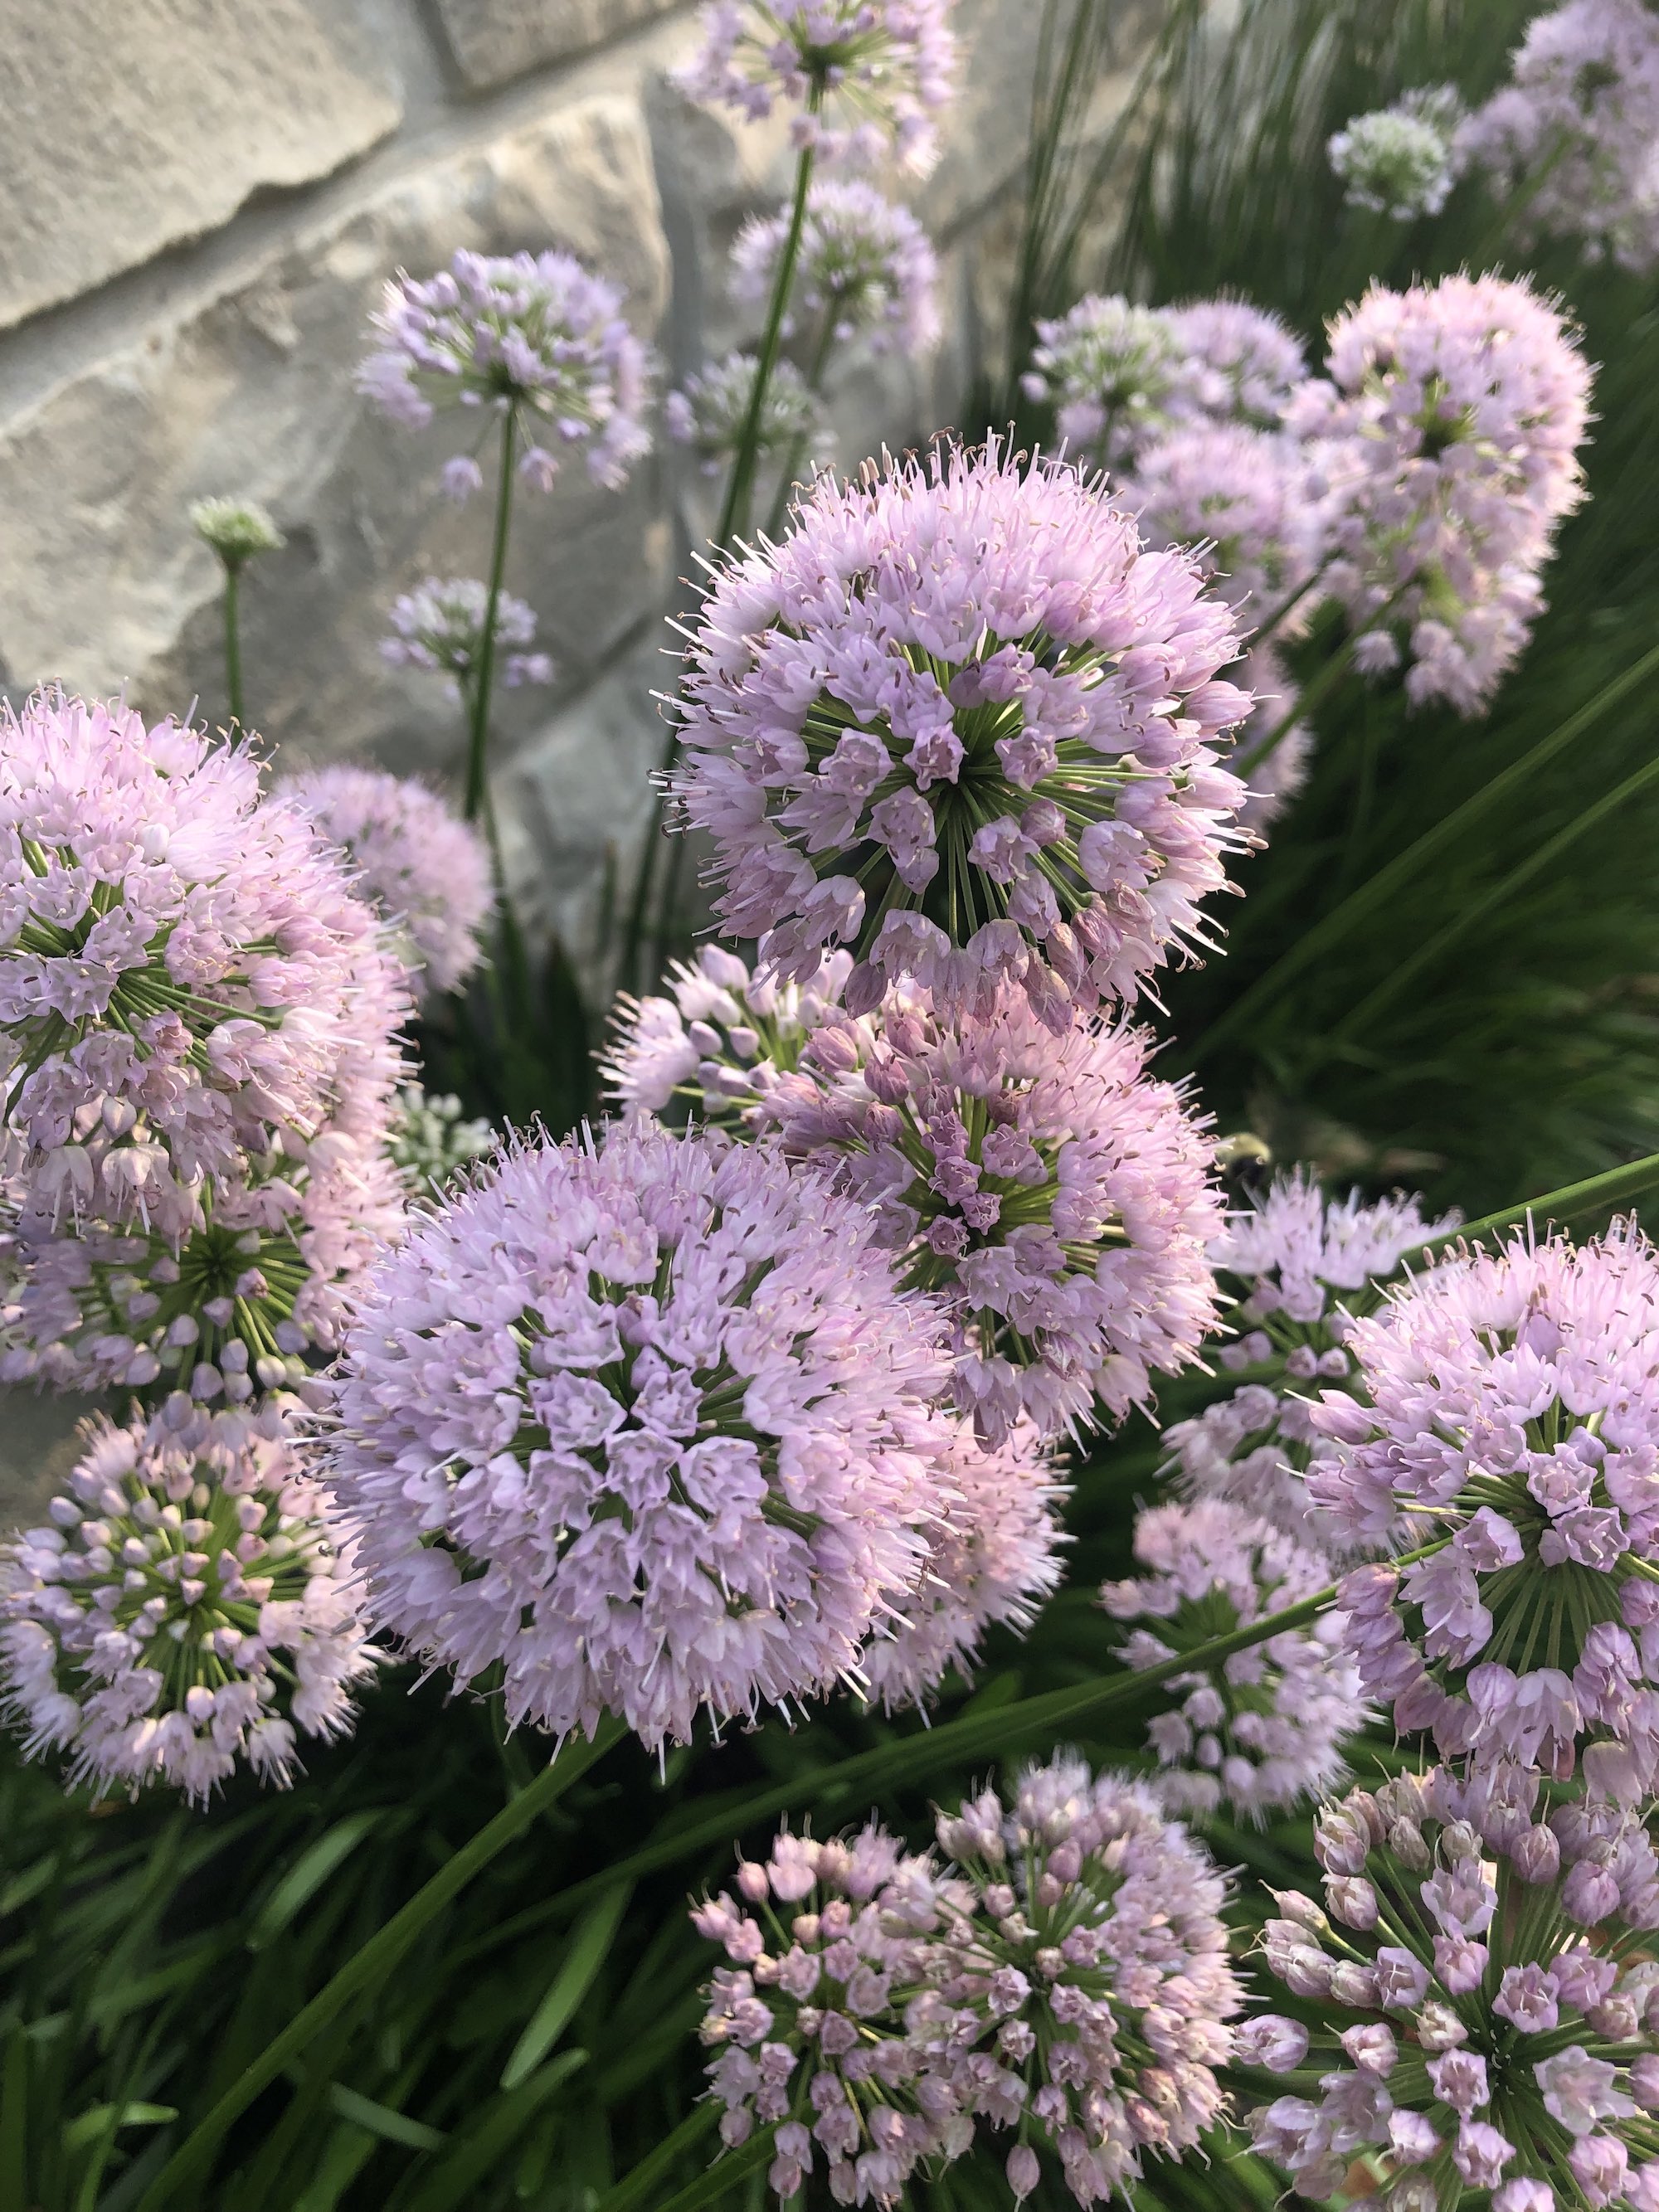 Cultivated Allium (Allium Tanguticum) along Arbor Drive by Temple Beth El stone wall on July 30, 2021.